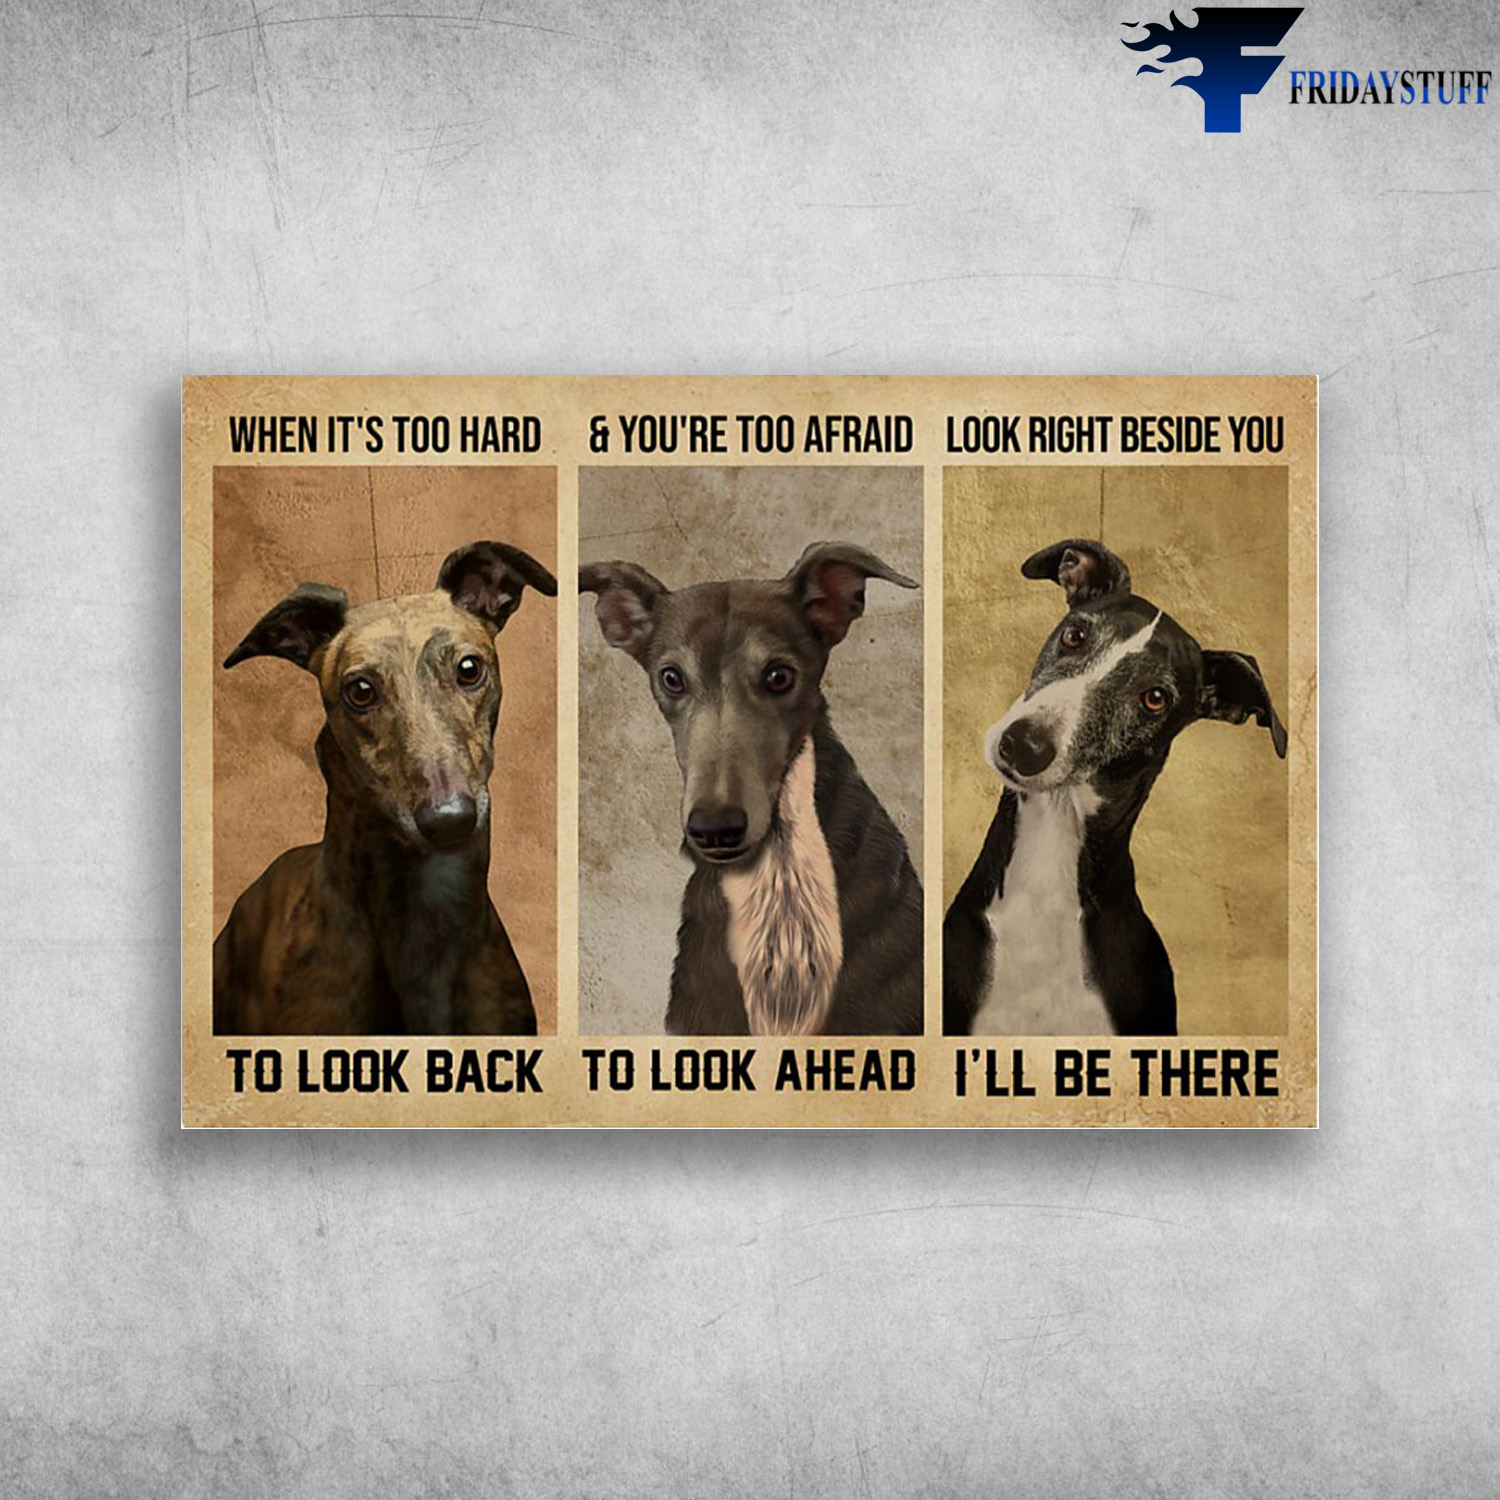 Greyhound Dog - When It's Too Hard To Look Back, And You Are Too Afraid To Look Ahead, Look Right Beside You I'll Be There